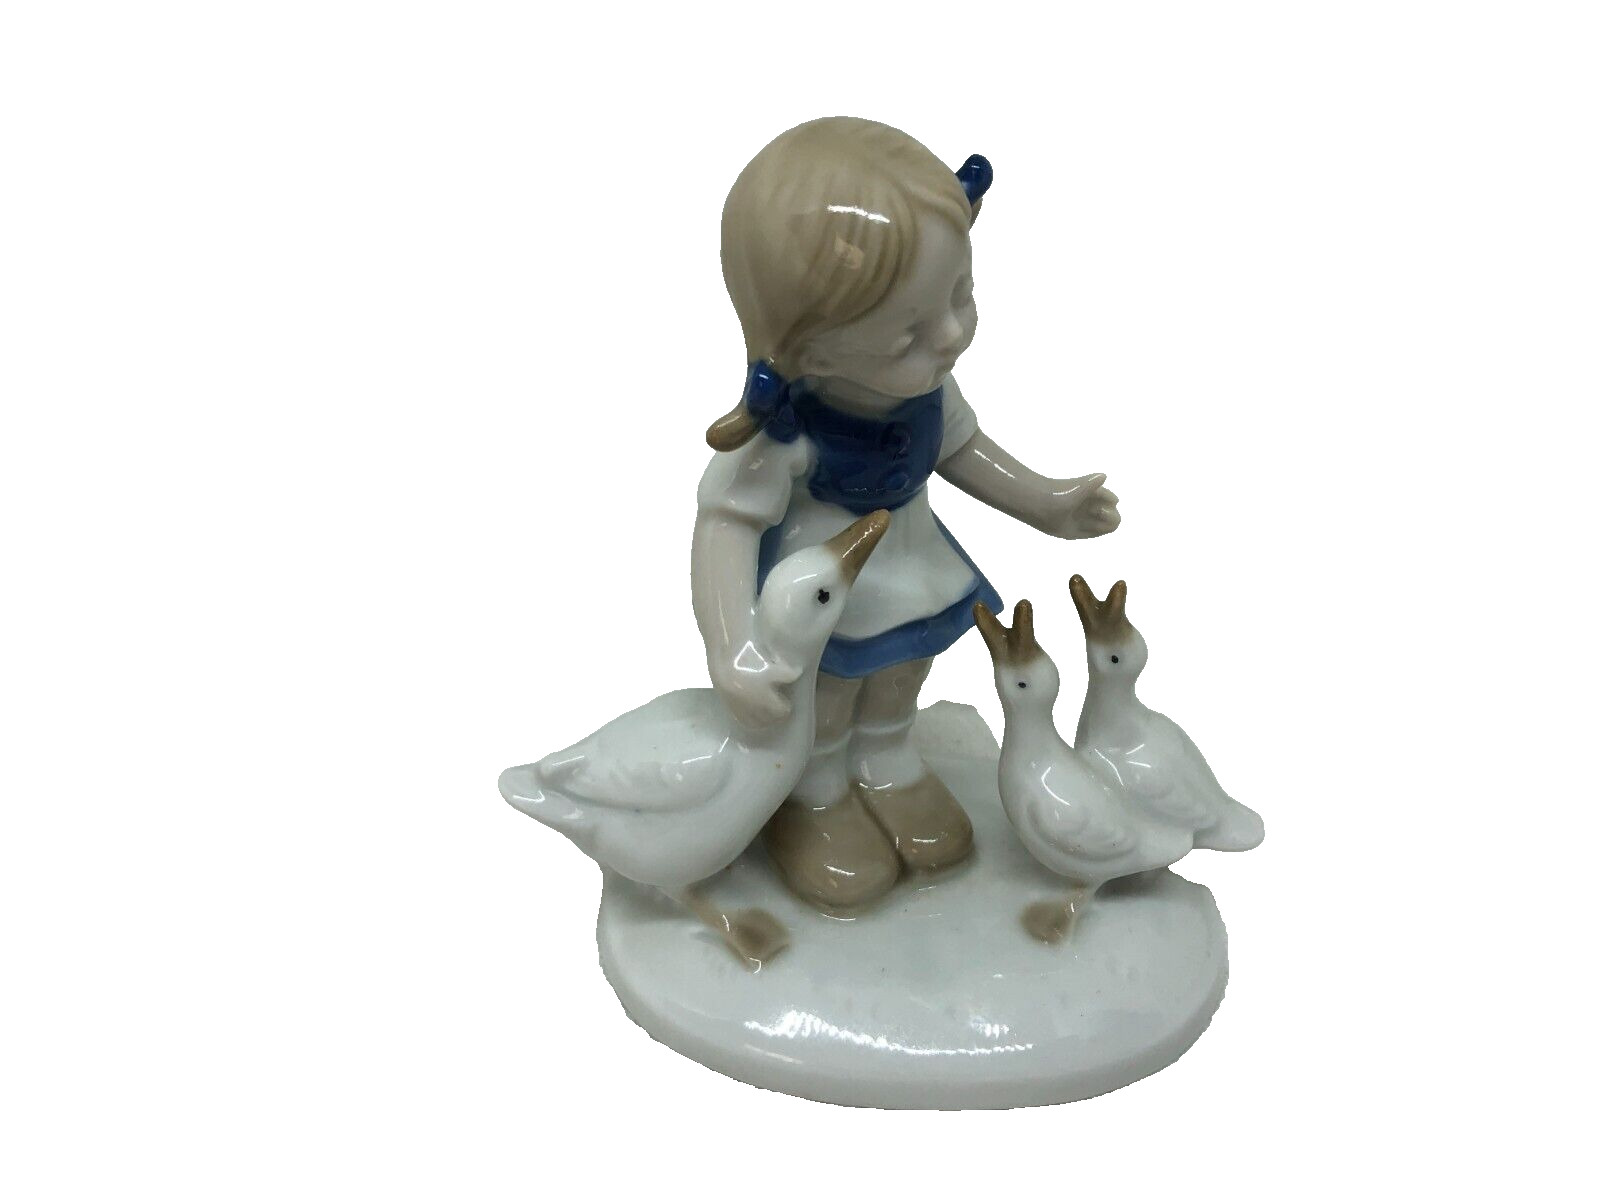 Vintage Porcelain Girl With Horn & 3 Geese 4.5” Figurine Denmark Blue and White